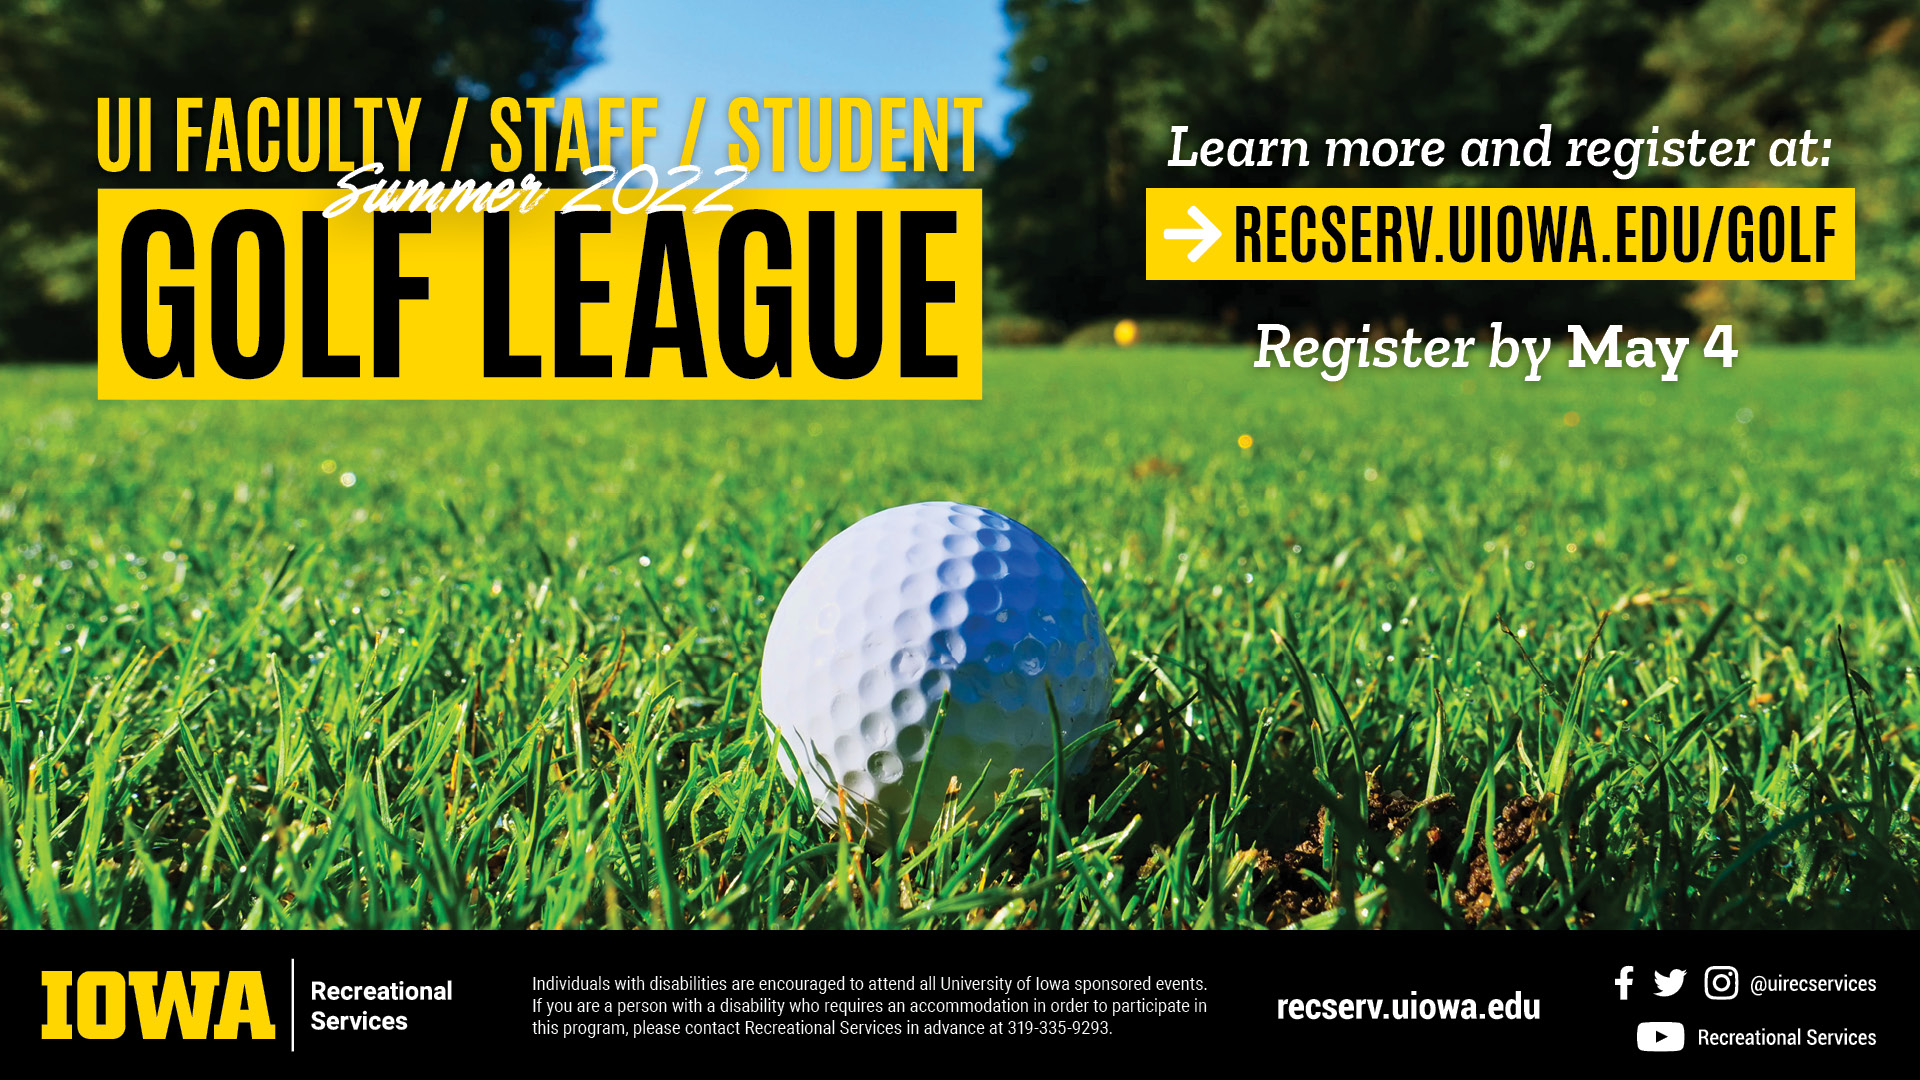 UI Faculty/Staff/Student Golf League. Learn more and register at: recserv.uiowa.edu/golf. register by May 4.